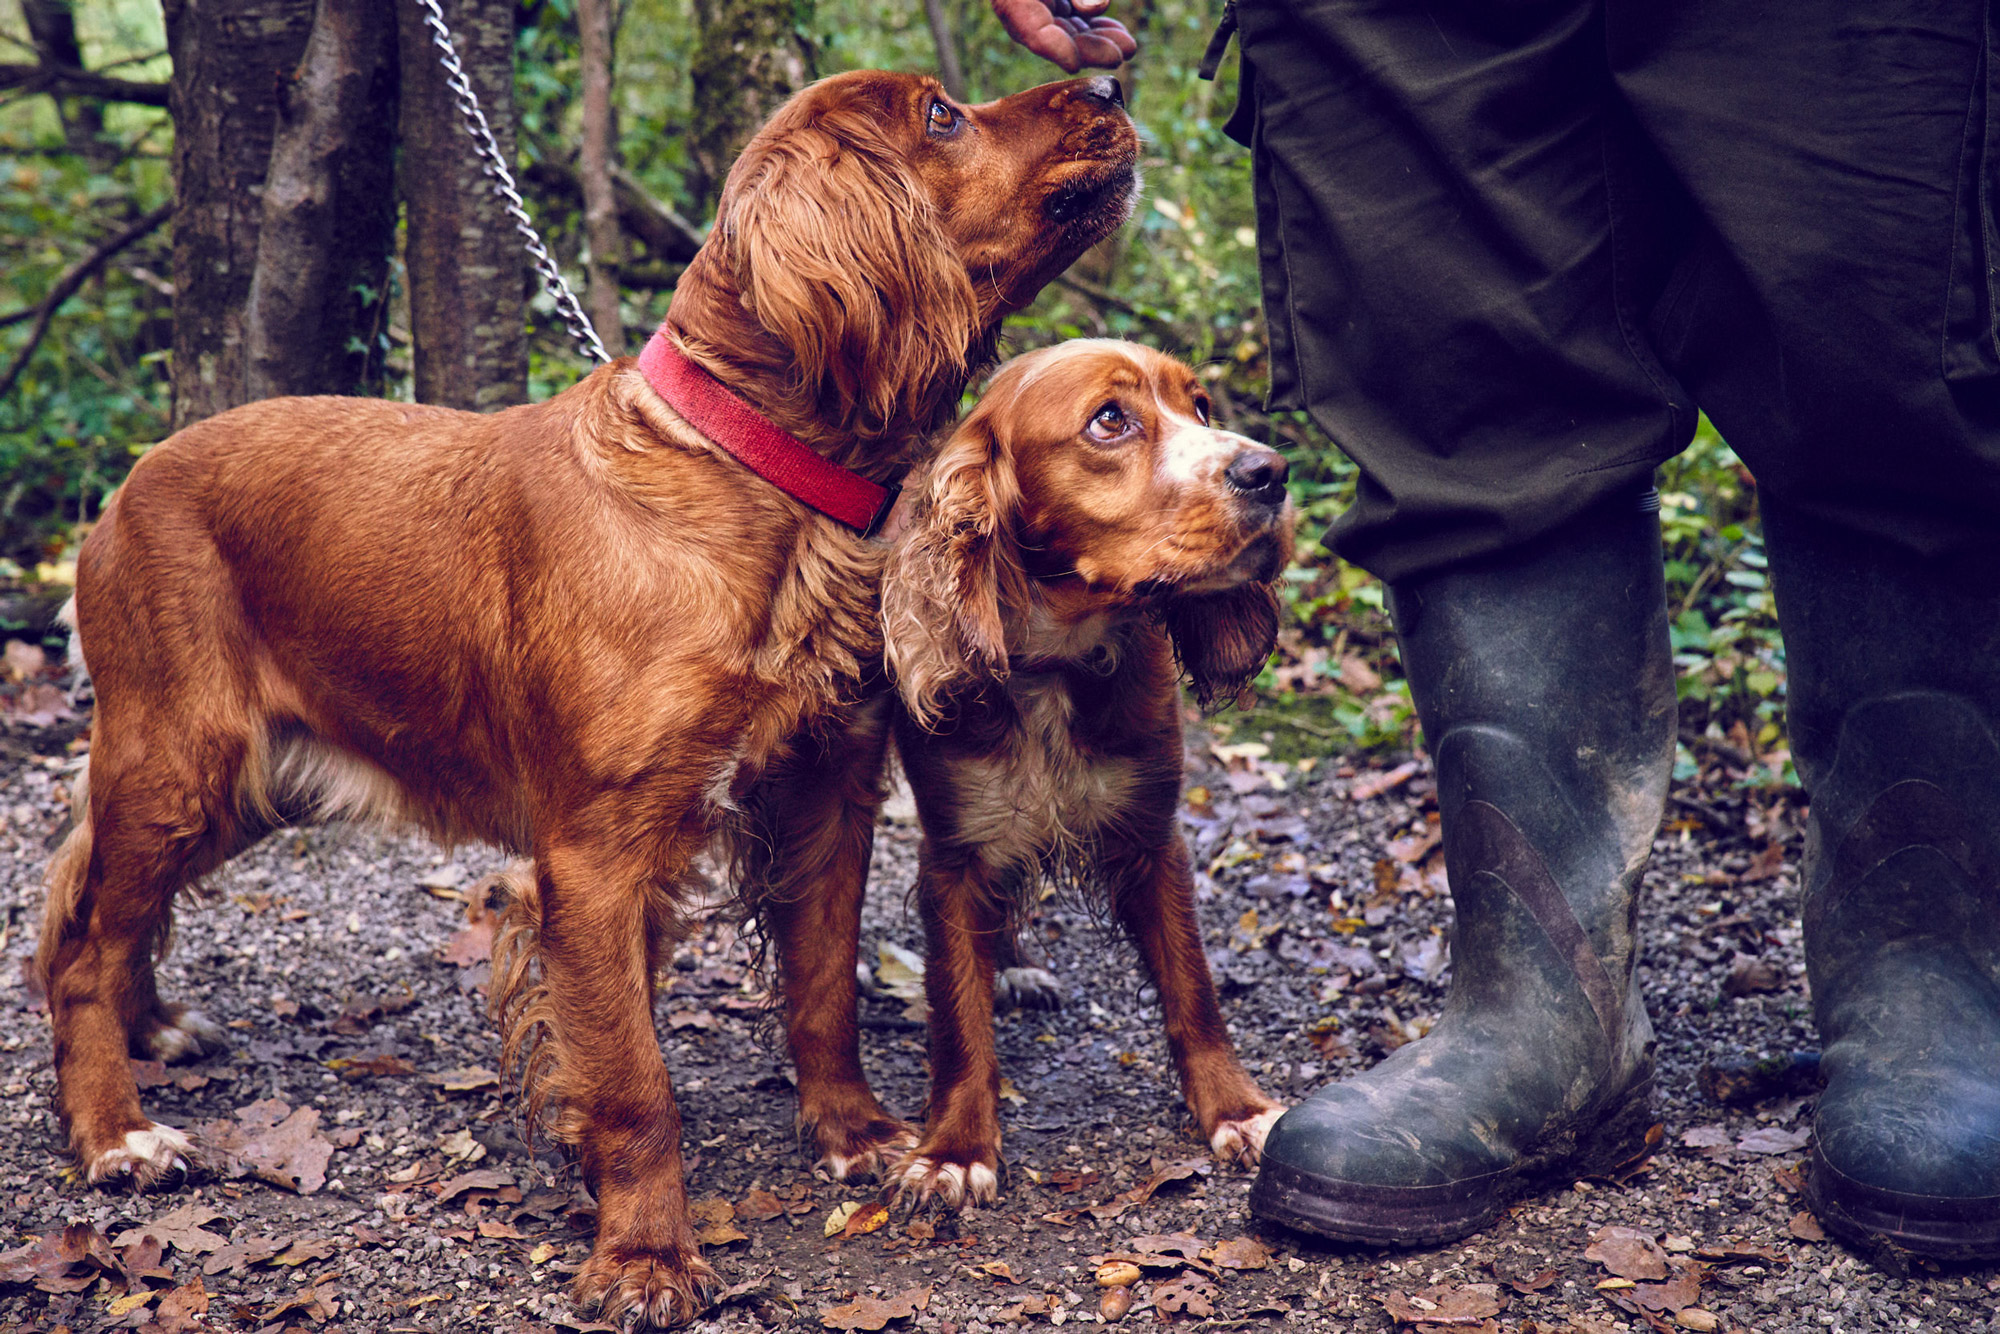 Two small brown dogs next to man in wellington boots